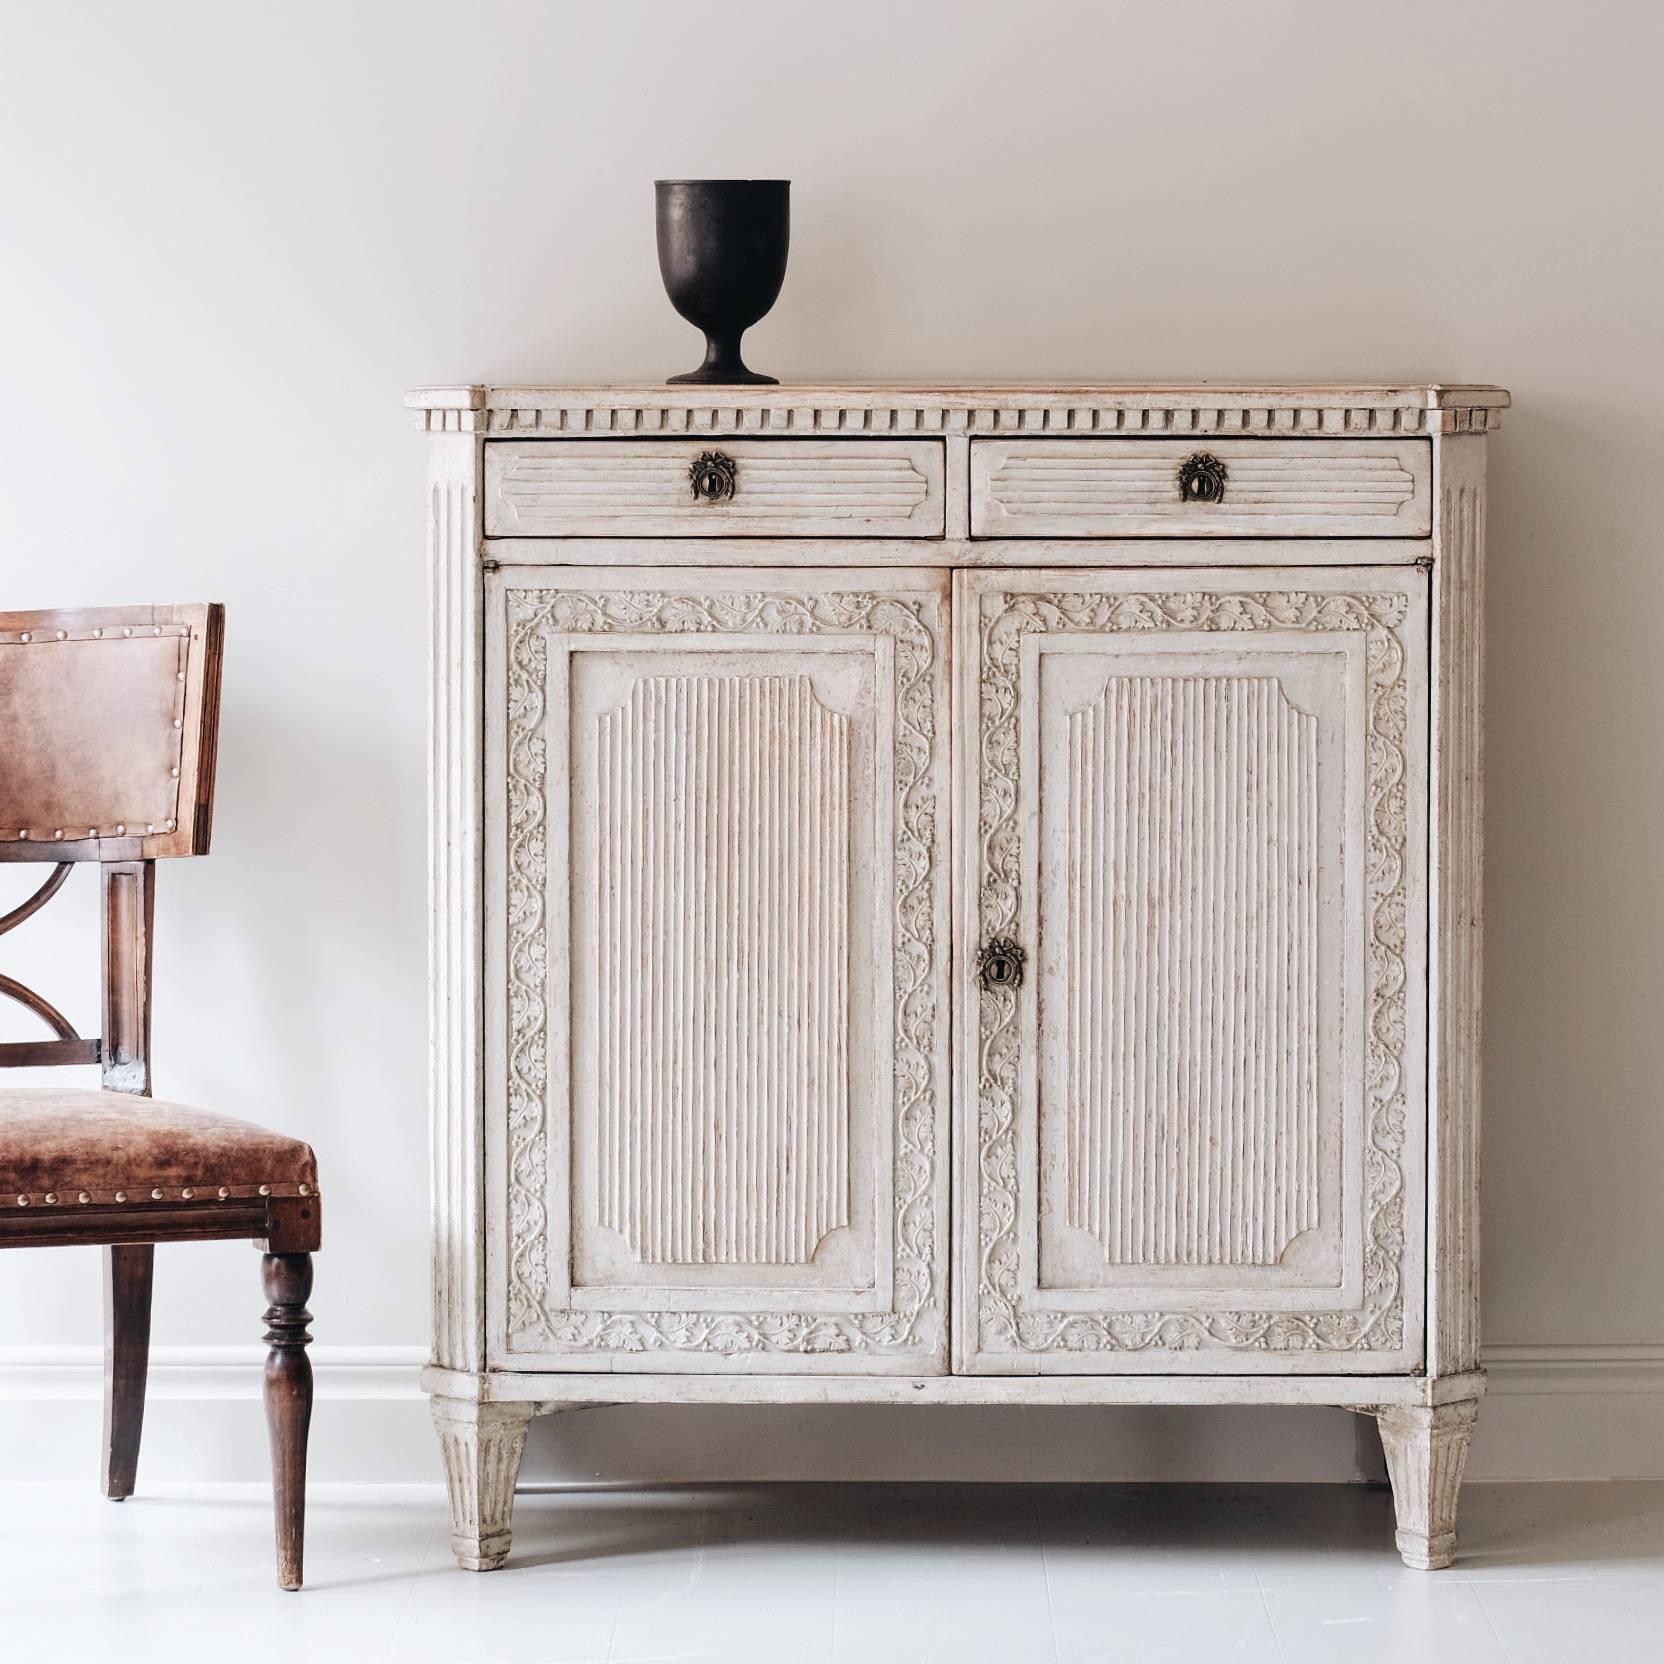 Exceptional 19th century Gustavian sideboard in original colour with reedings on the front and sides and very fine carvings.

Condition: Very good.

Wear: Wear consistent with age and use.

Finish: Dry scraped to original colour and